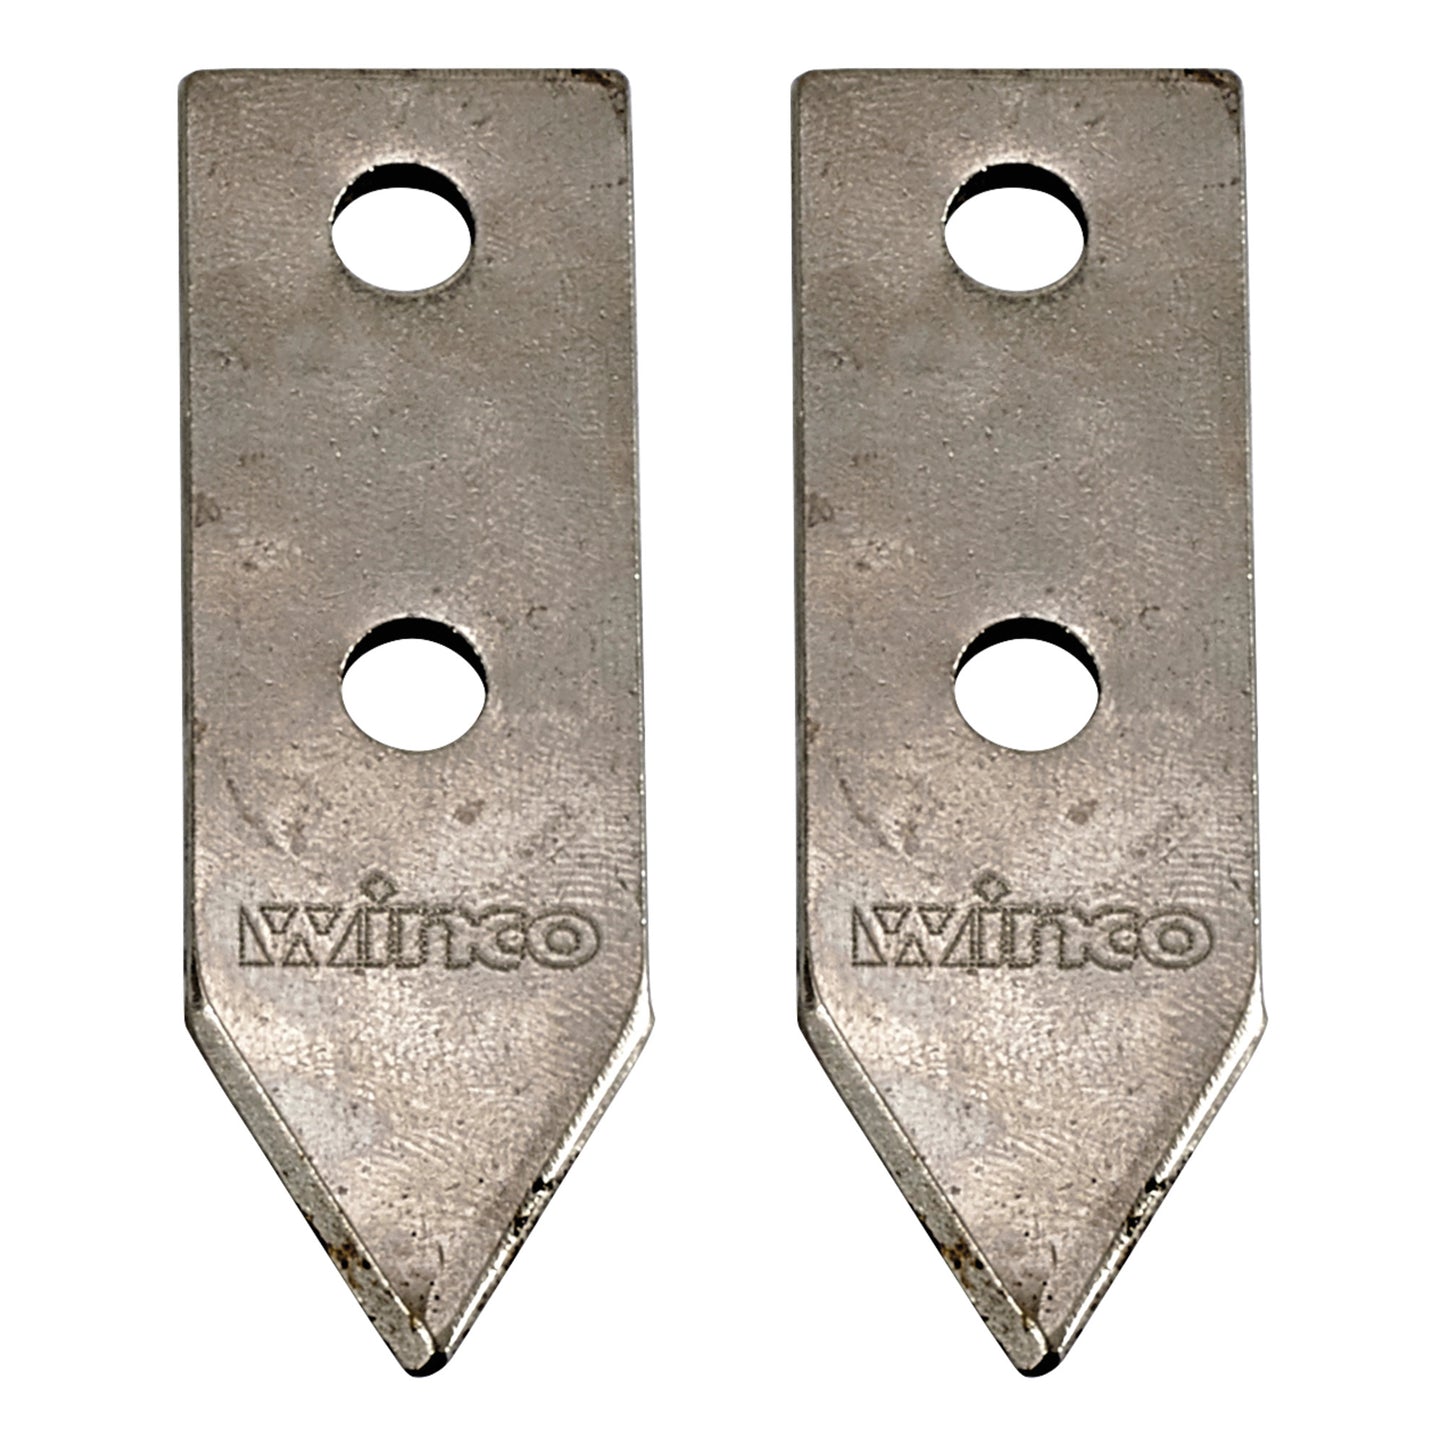 CO-1B - Replacement Blade Set for CO-1 Can Opener